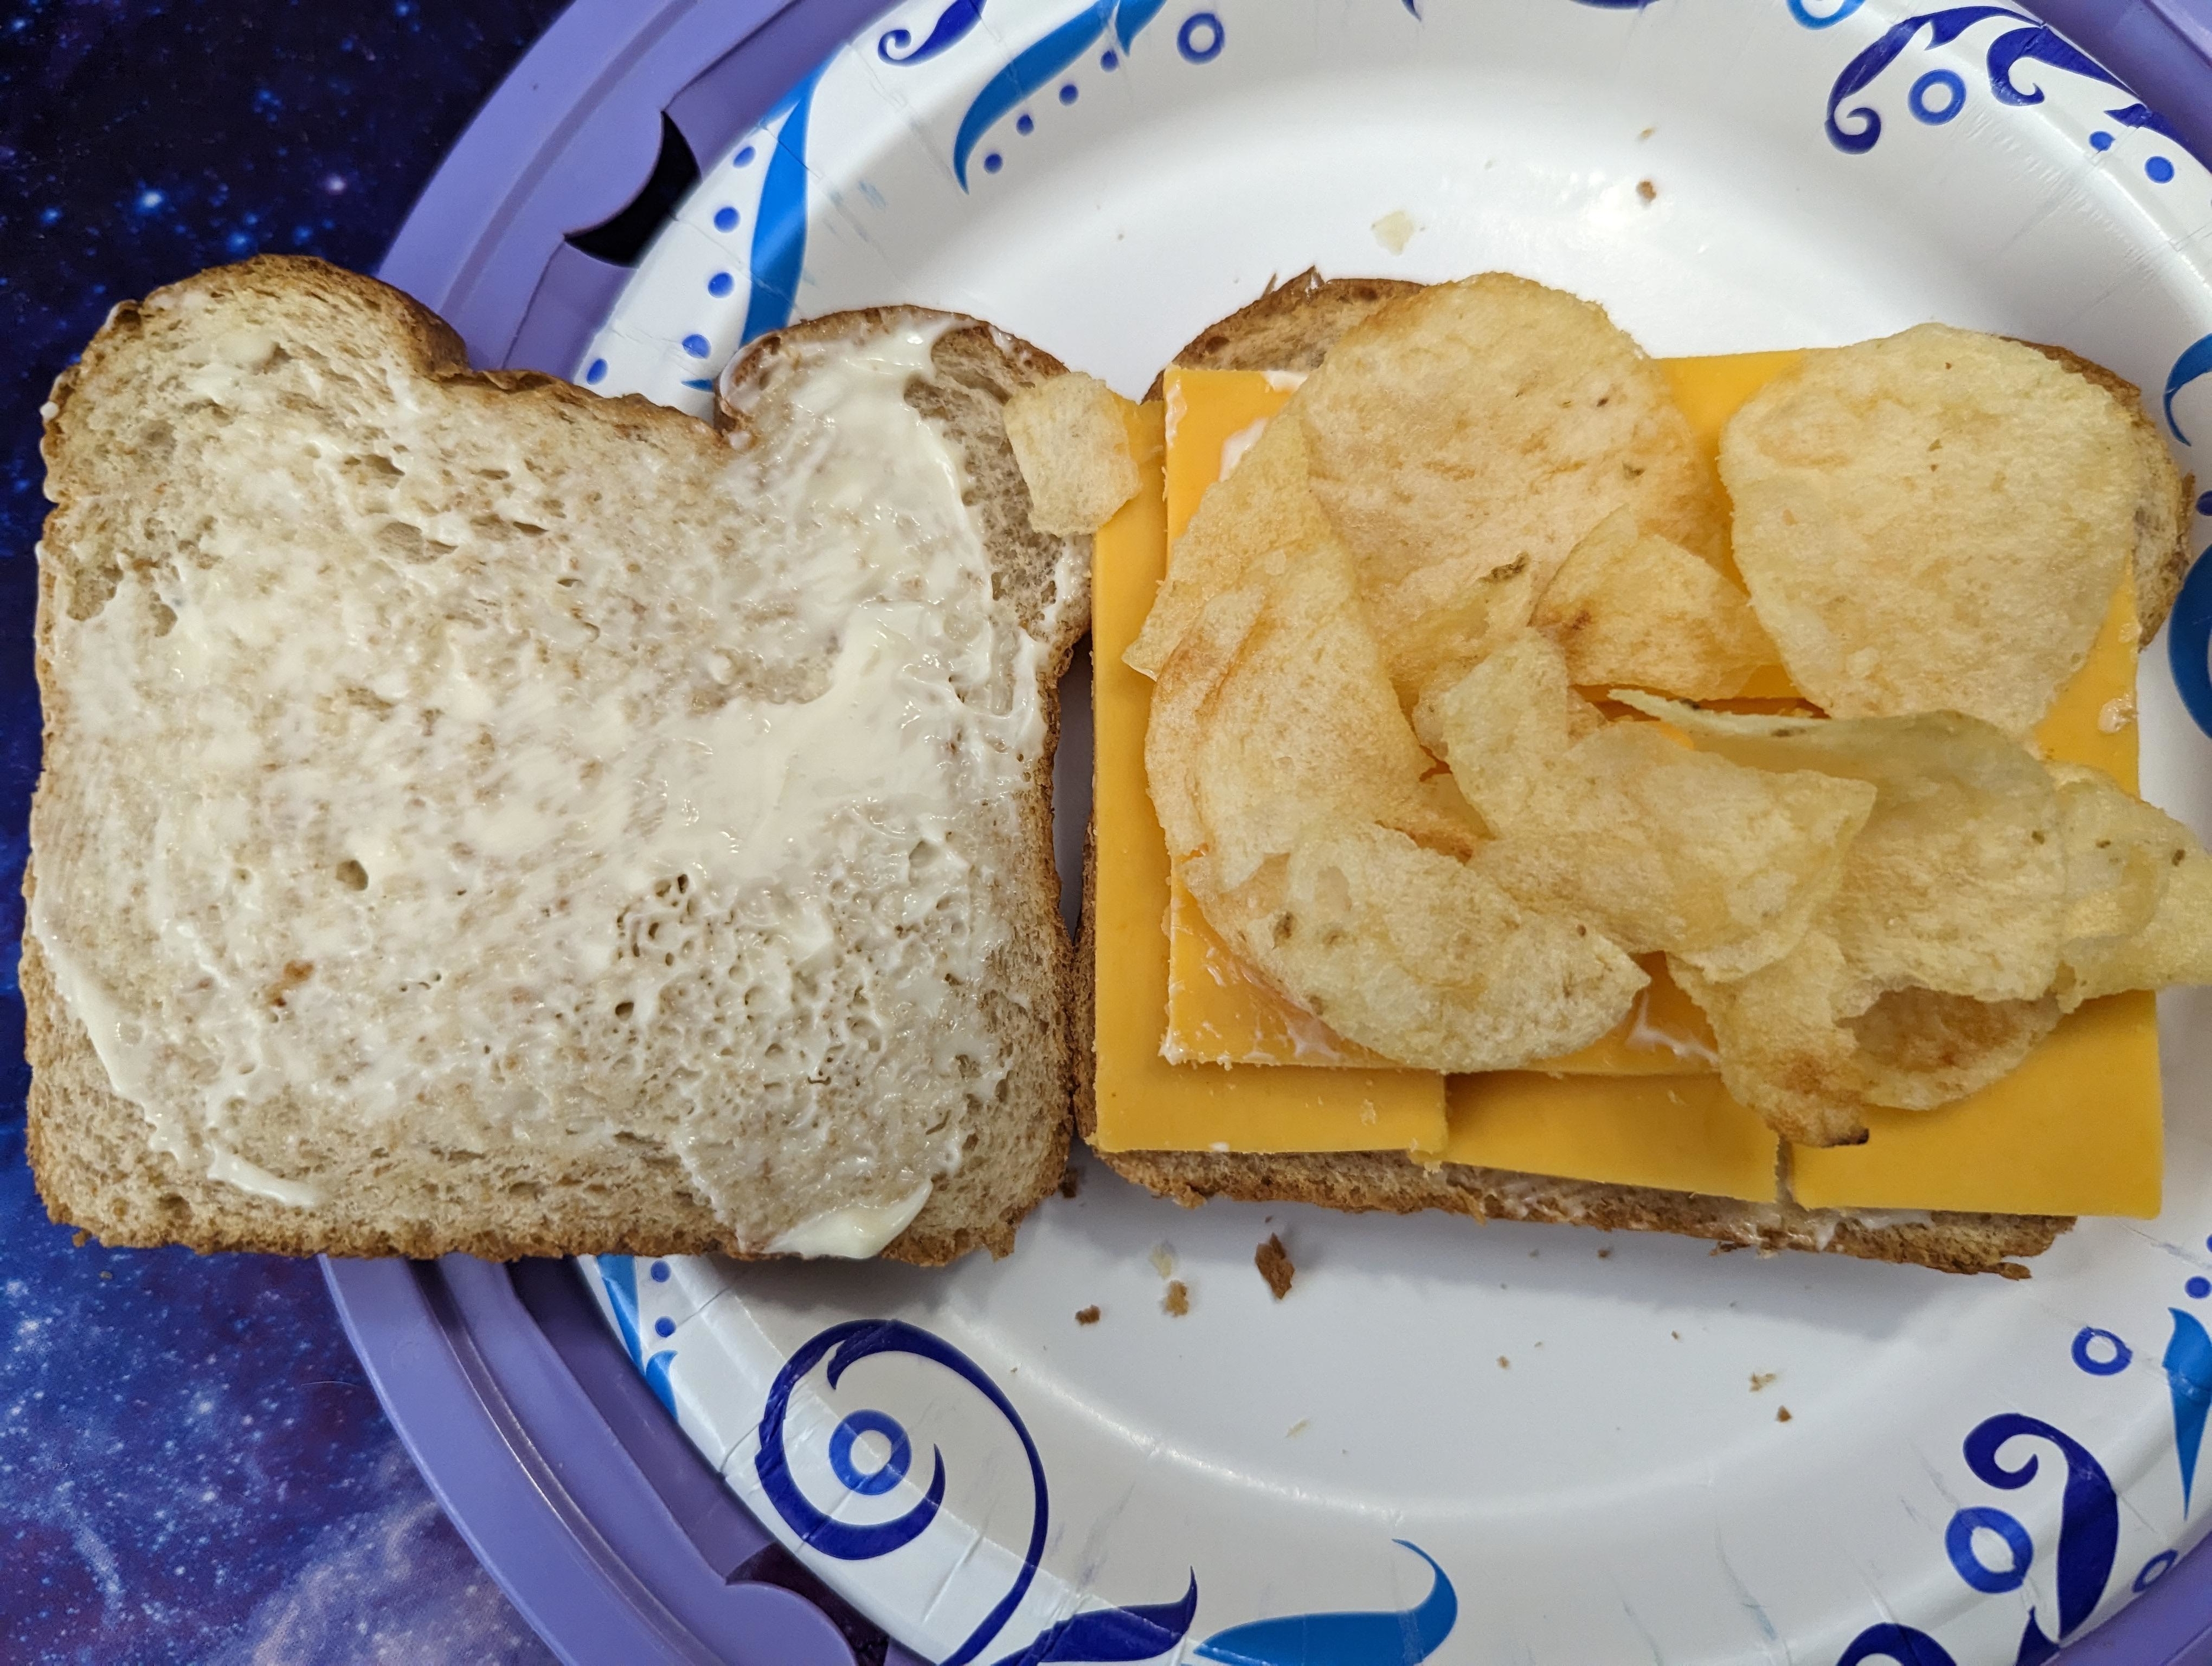 Open-faced sandwich with one slice of bread, mayonnaise, cheese, and potato chips on a paper plate